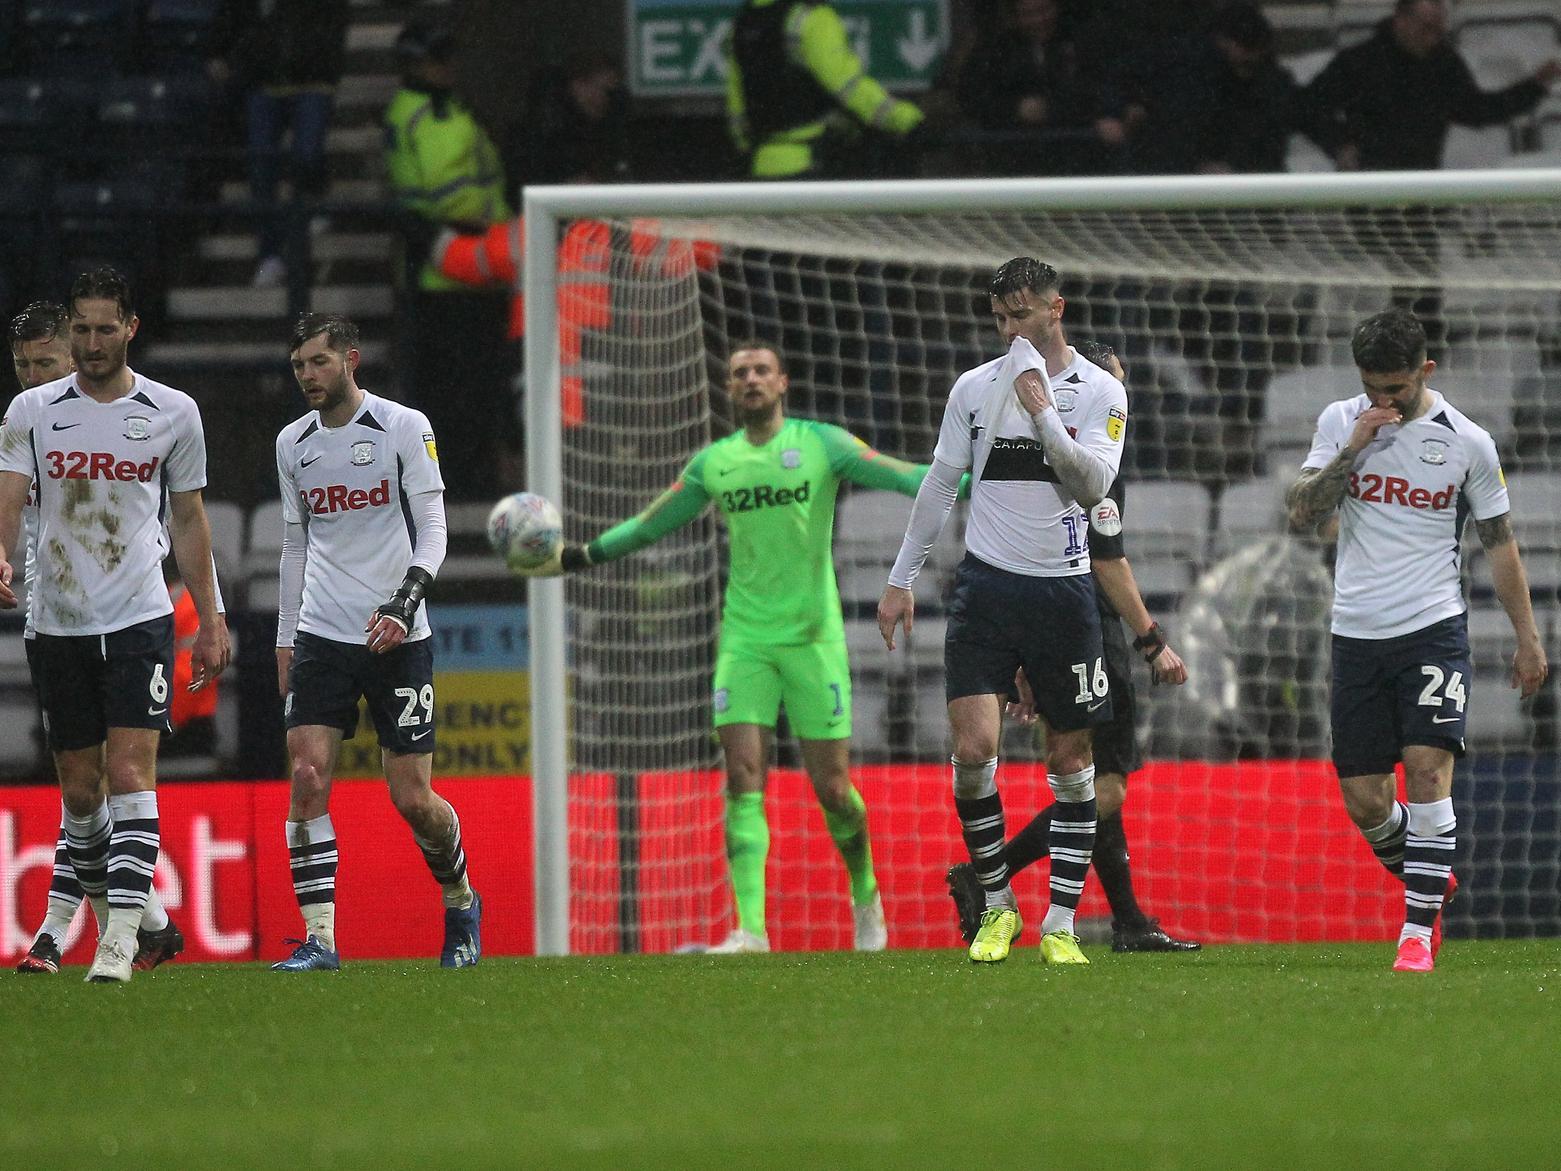 The Preston players looked dejected after conceding against Millwall